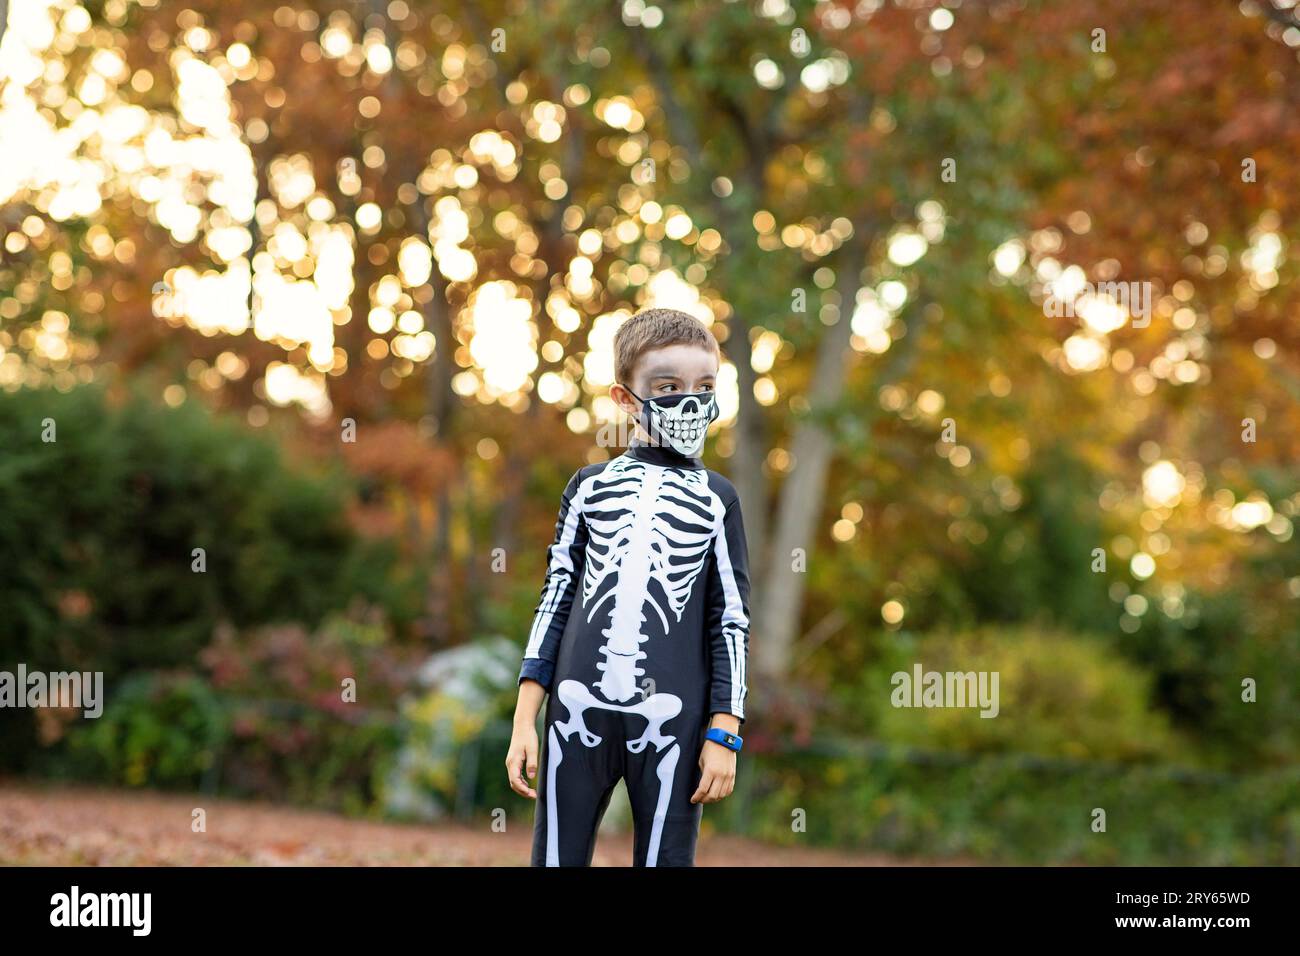 Young boy in skeleton Halloween costume amid fall leaves. Stock Photo